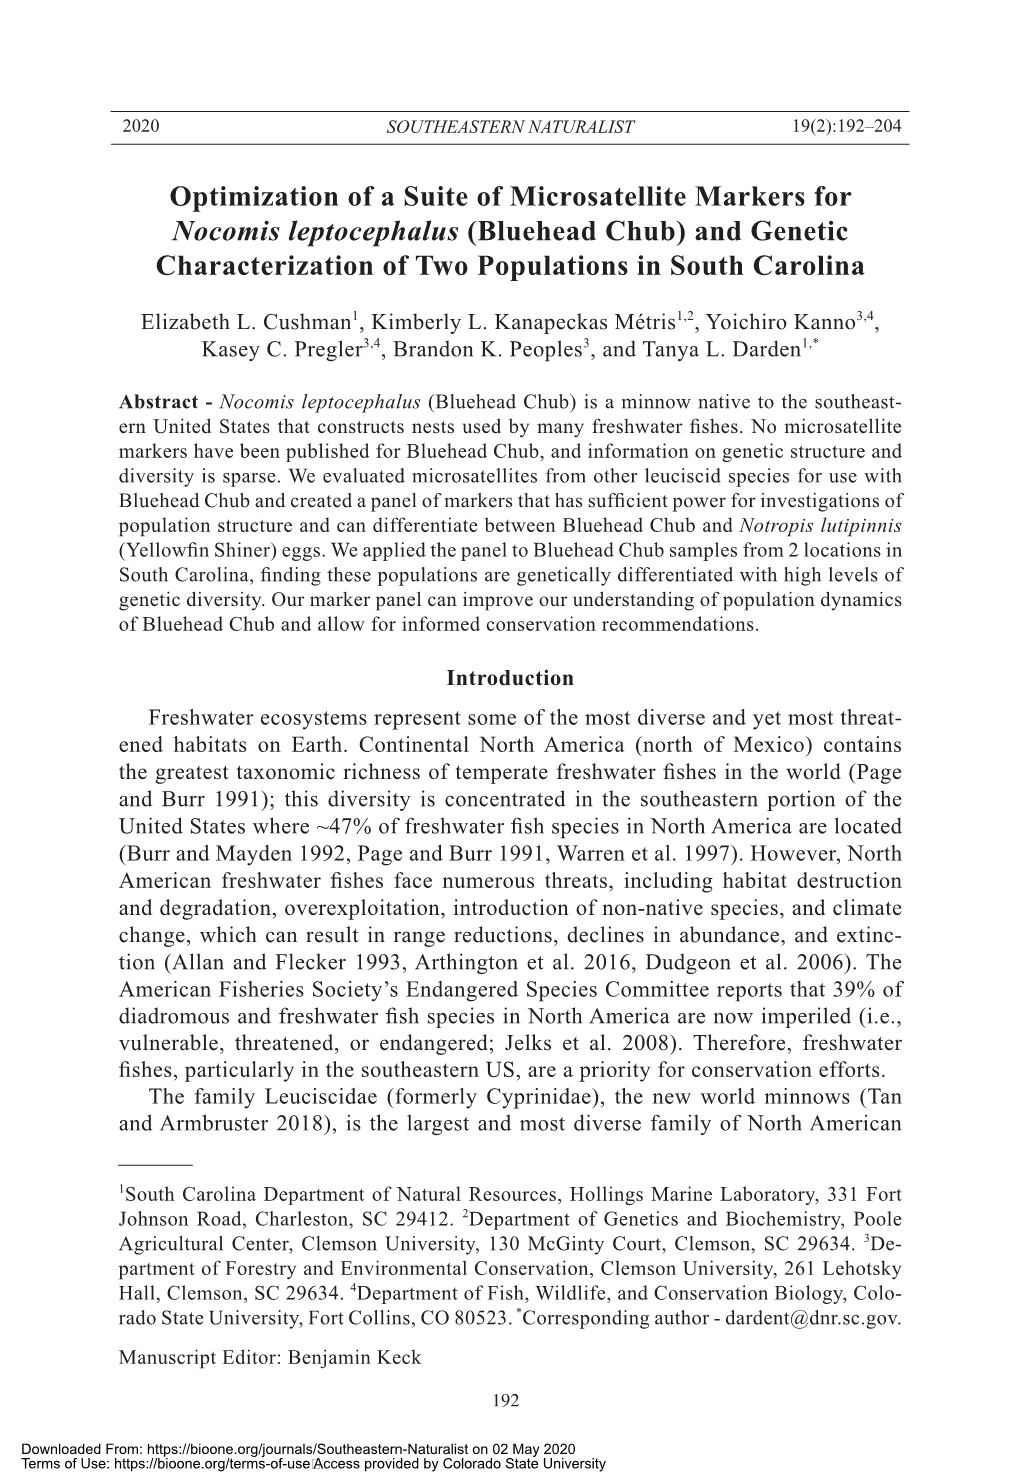 Optimization of a Suite of Microsatellite Markers for Nocomis Leptocephalus (Bluehead Chub) and Genetic Characterization of Two Populations in South Carolina